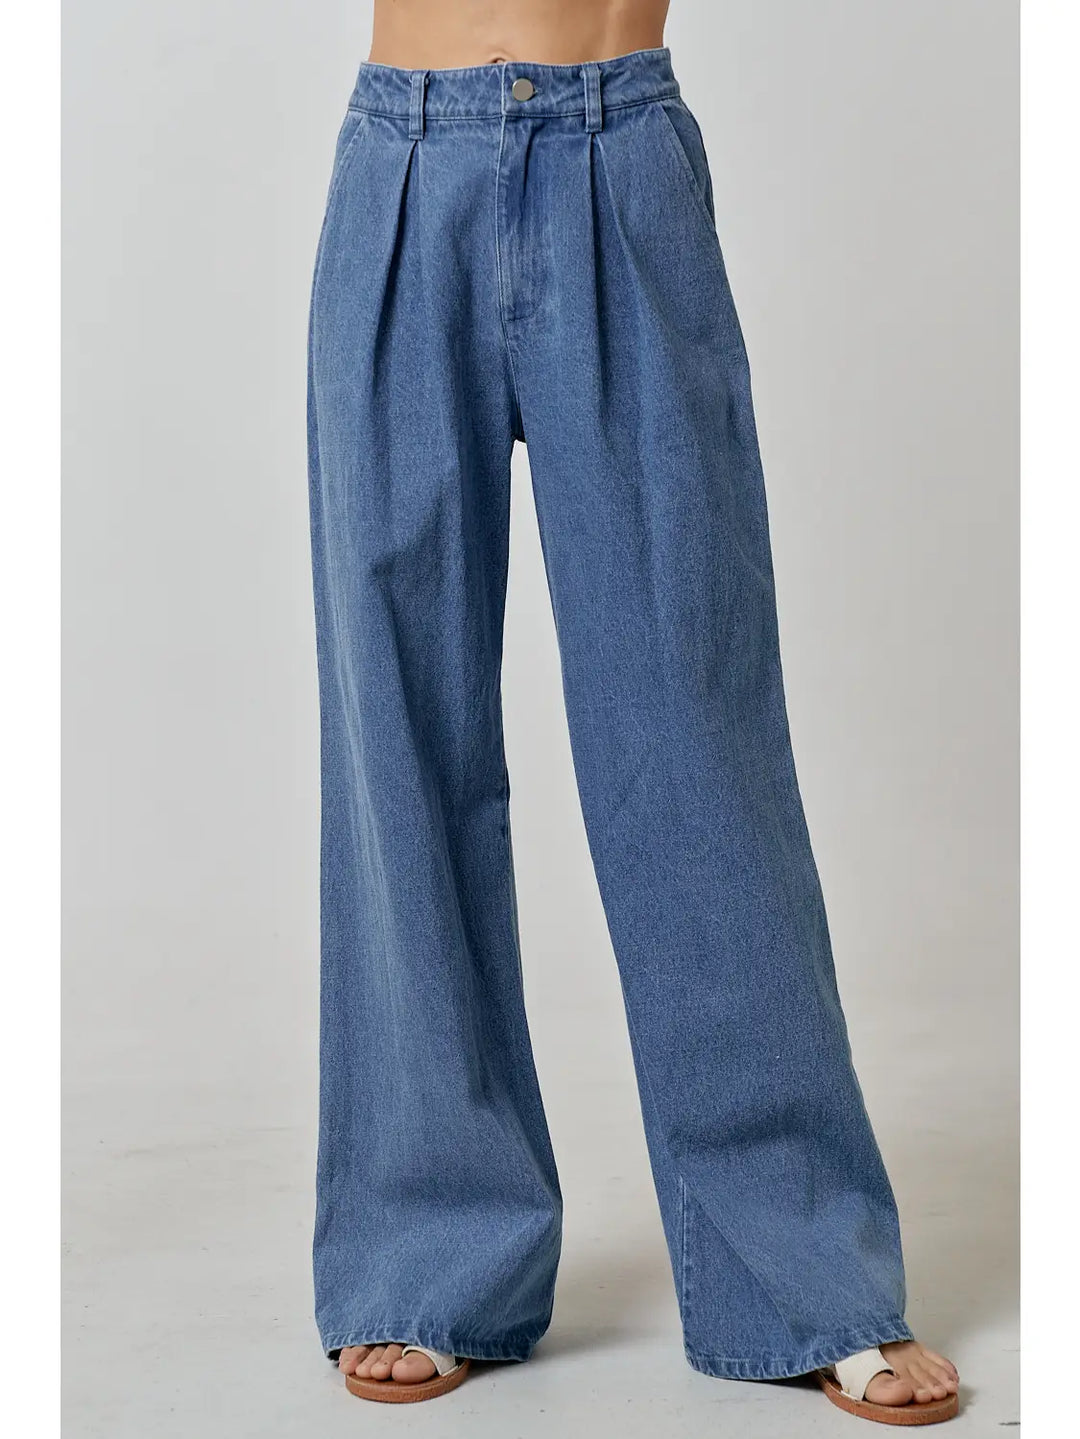 70's Pleated Wide Leg Jeans